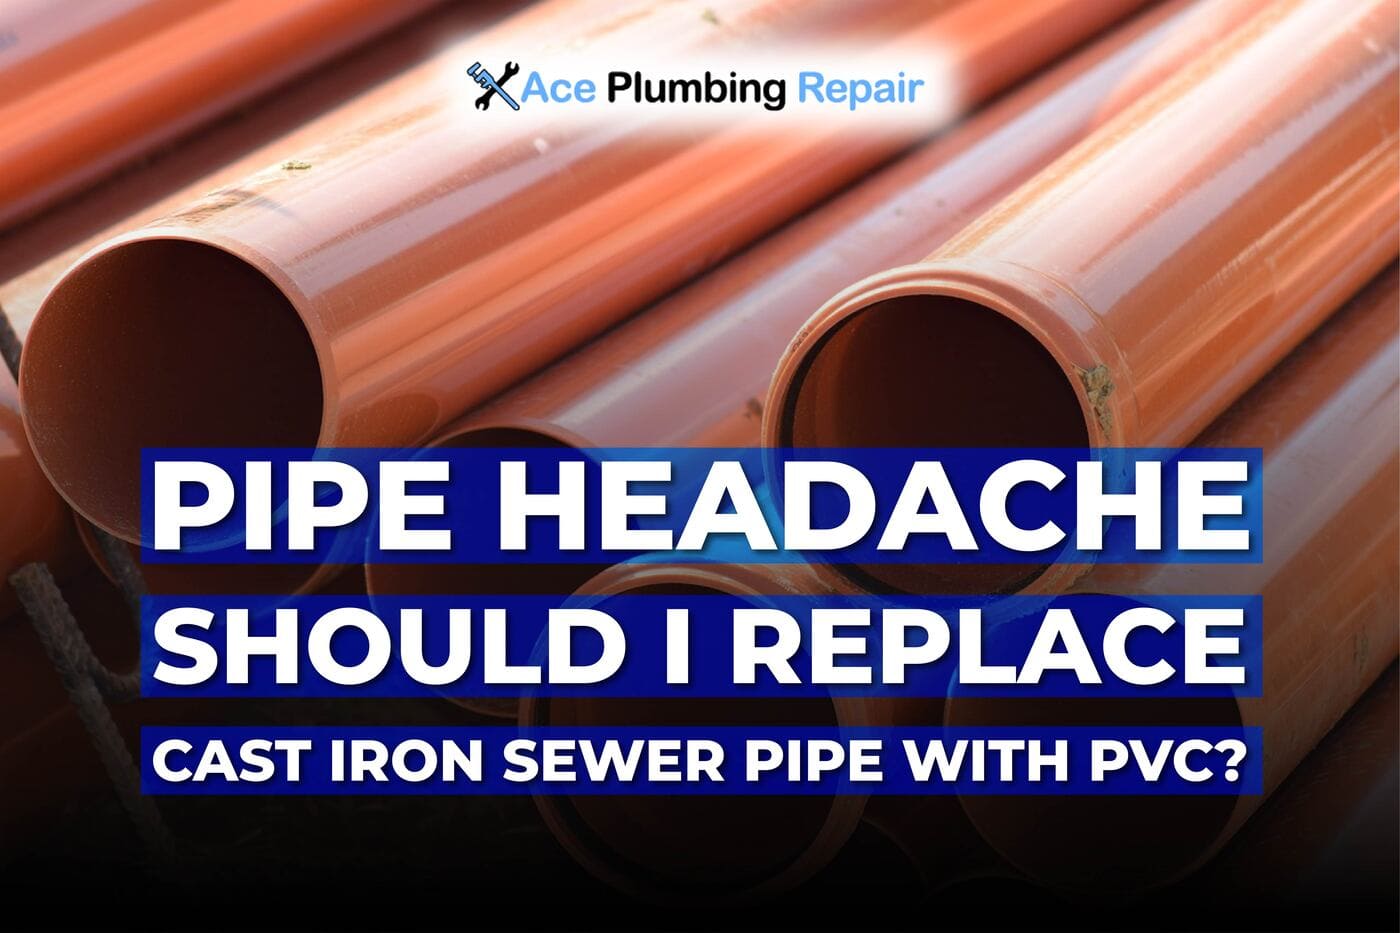 should I replace cast iron sewer pipe with PVC